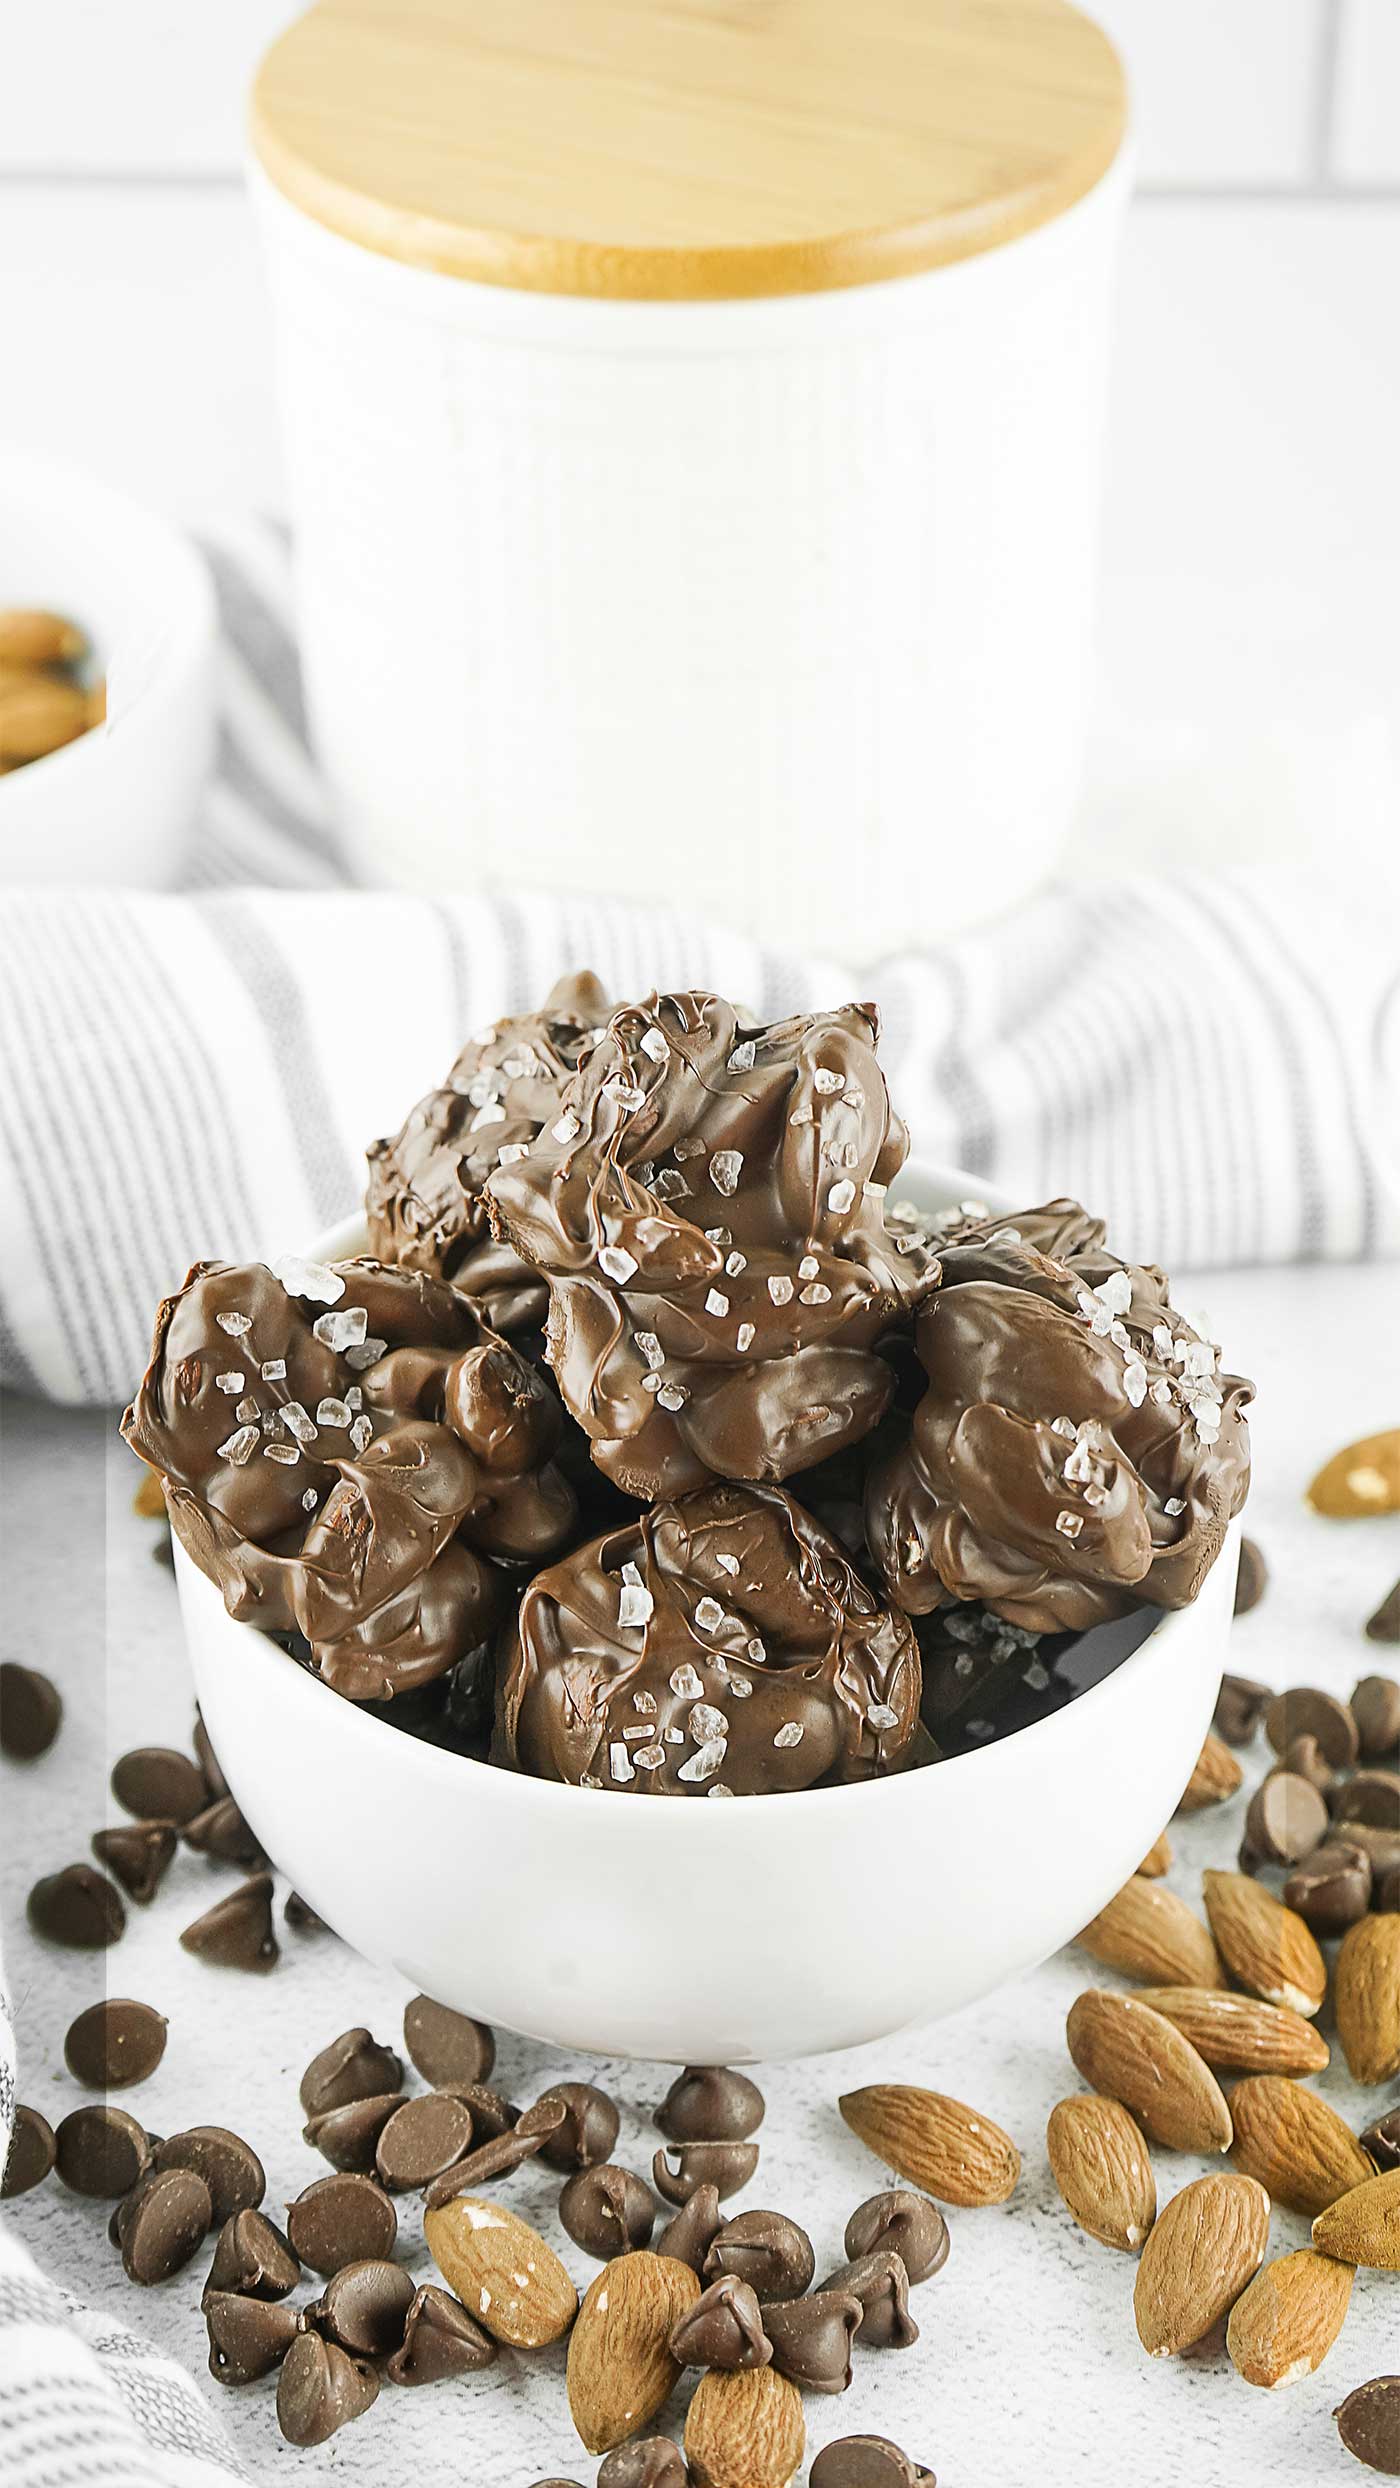 Bowl of Chocolate Covered Clusters